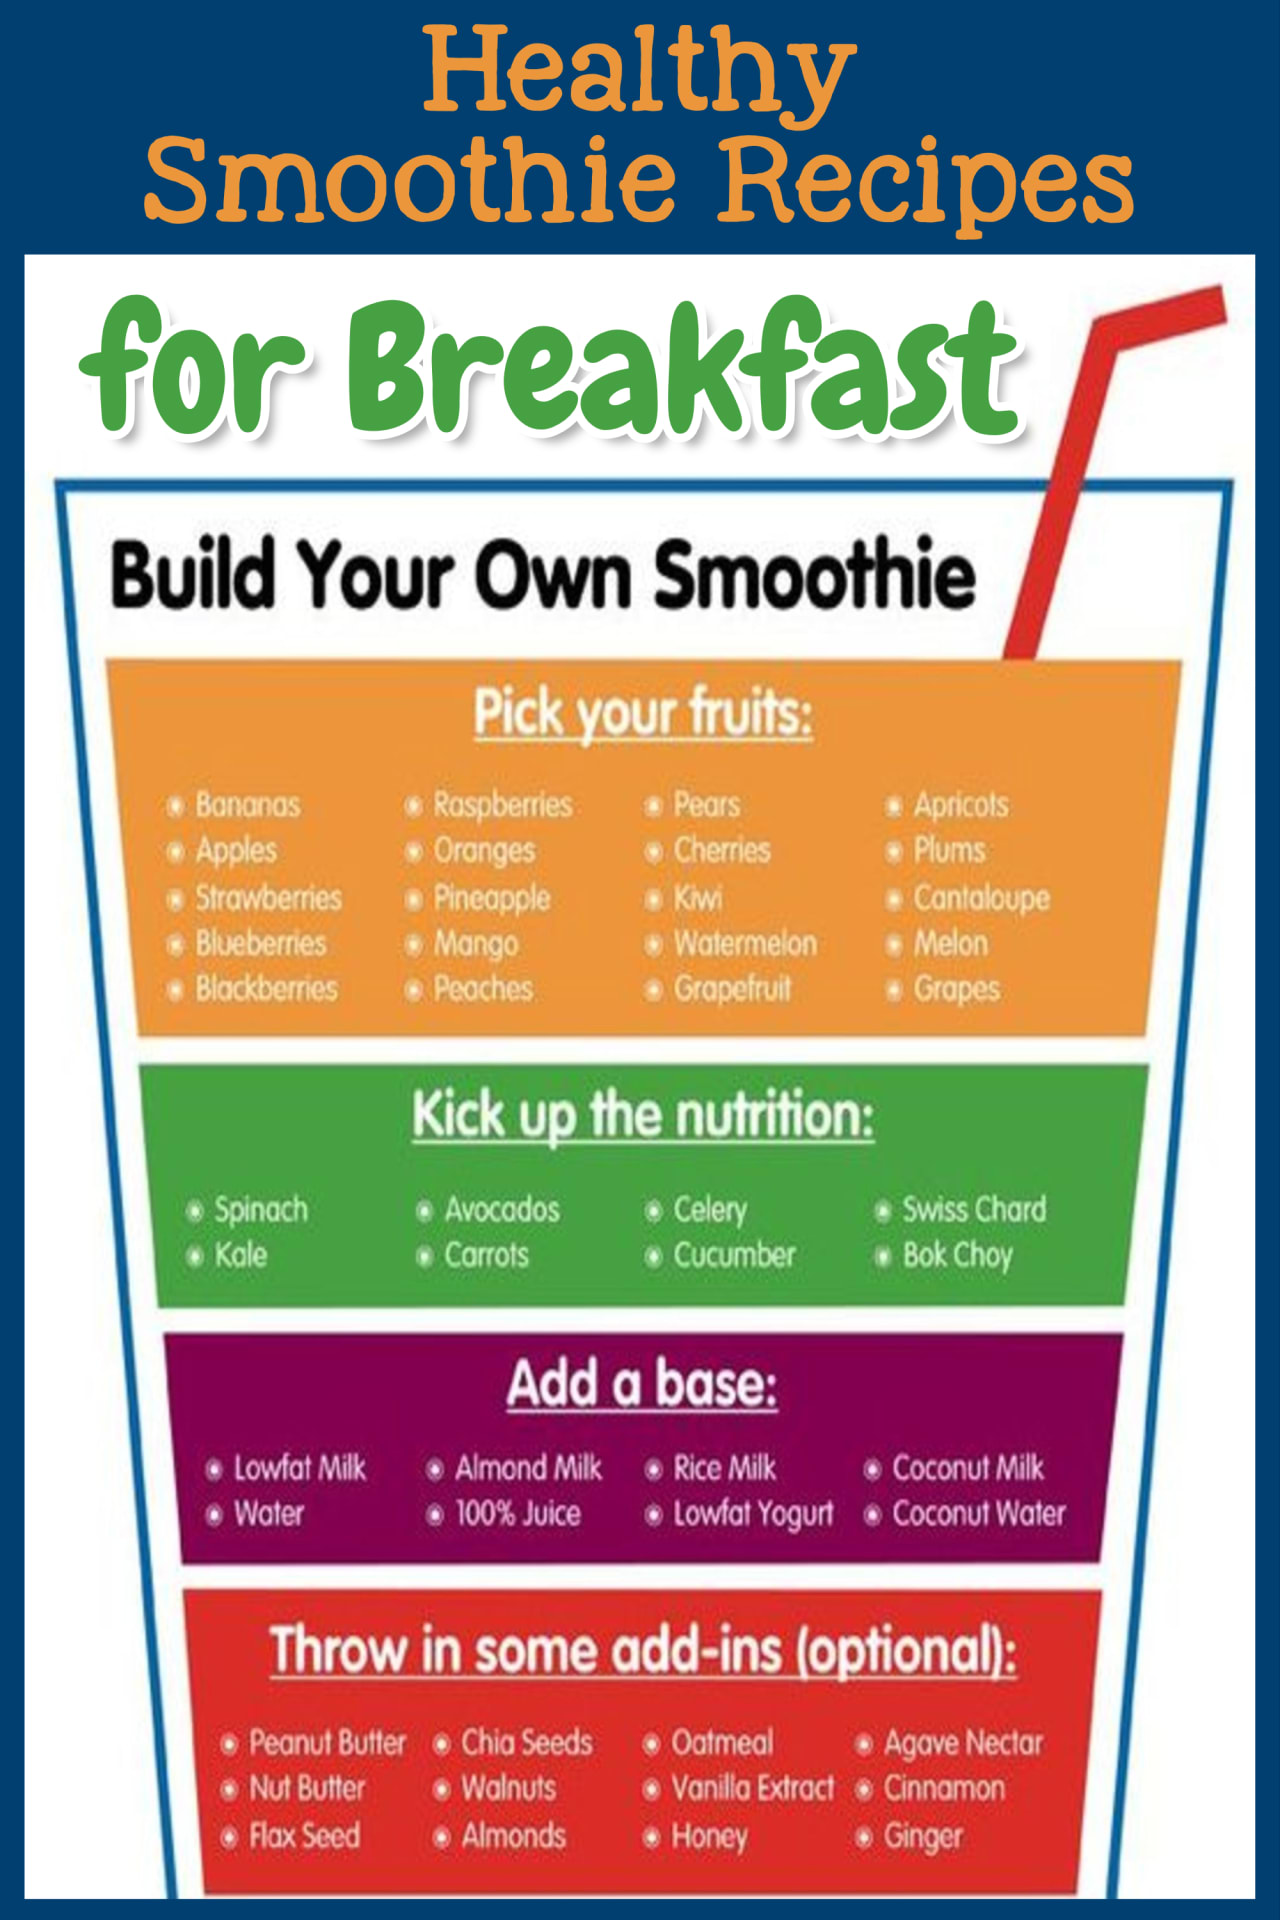 Healthy smoothie recipes for breakfast